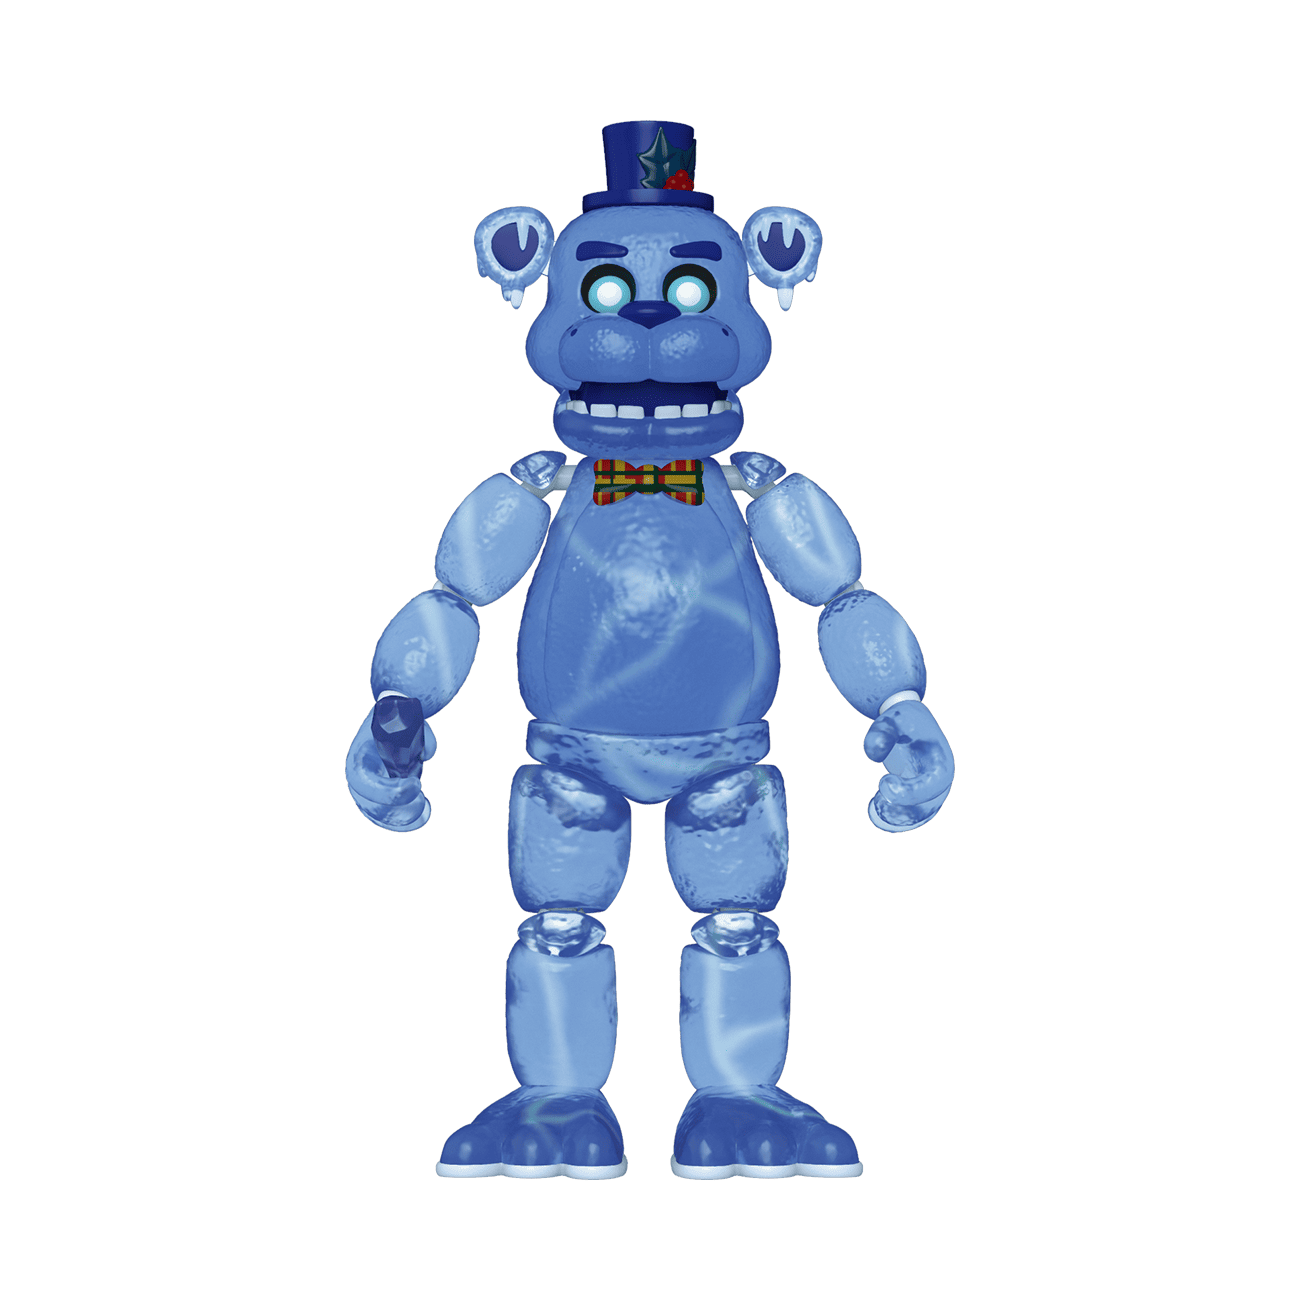  five nights at Freddy's Articulated Freddy Frostbear Action  Figure, 5 Inch : Toys & Games